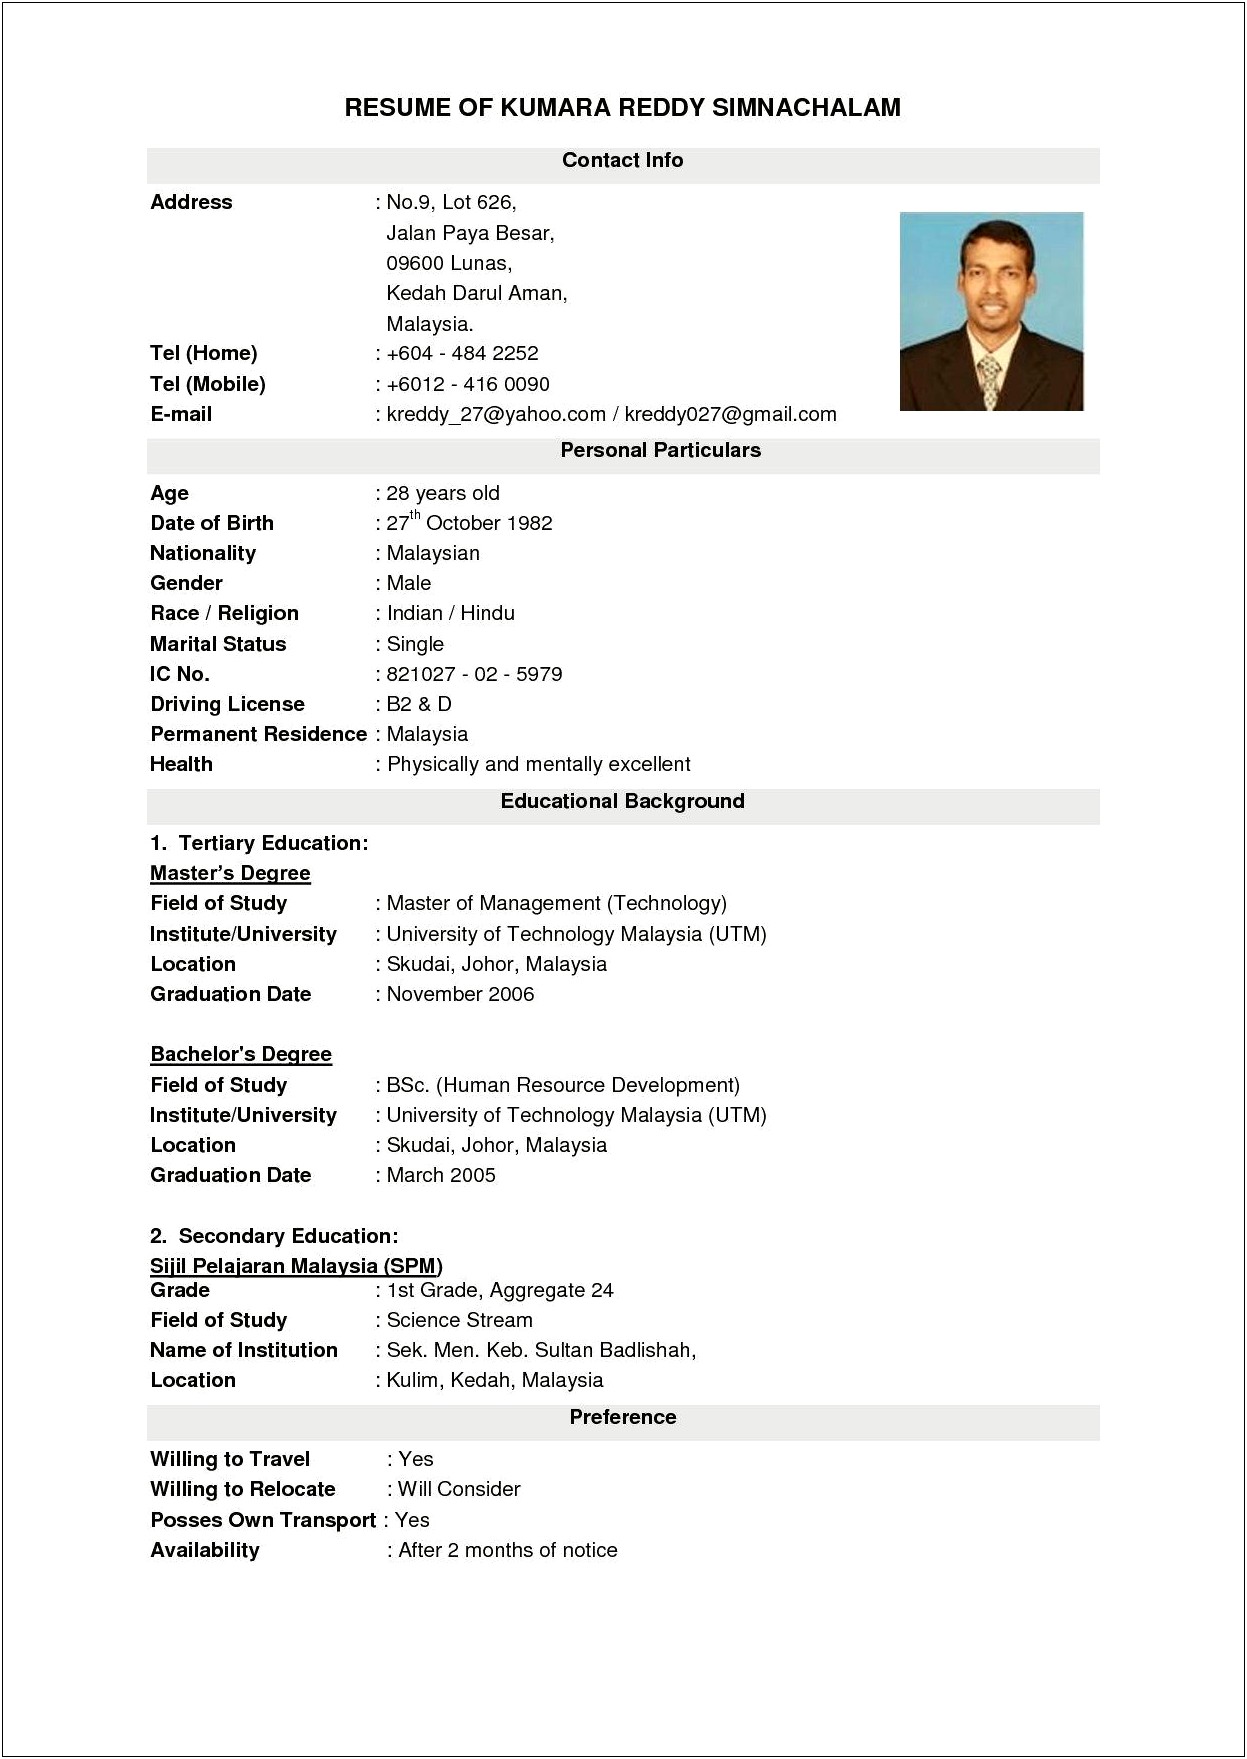 Sample Resume Formats To Fit Alot Of Information